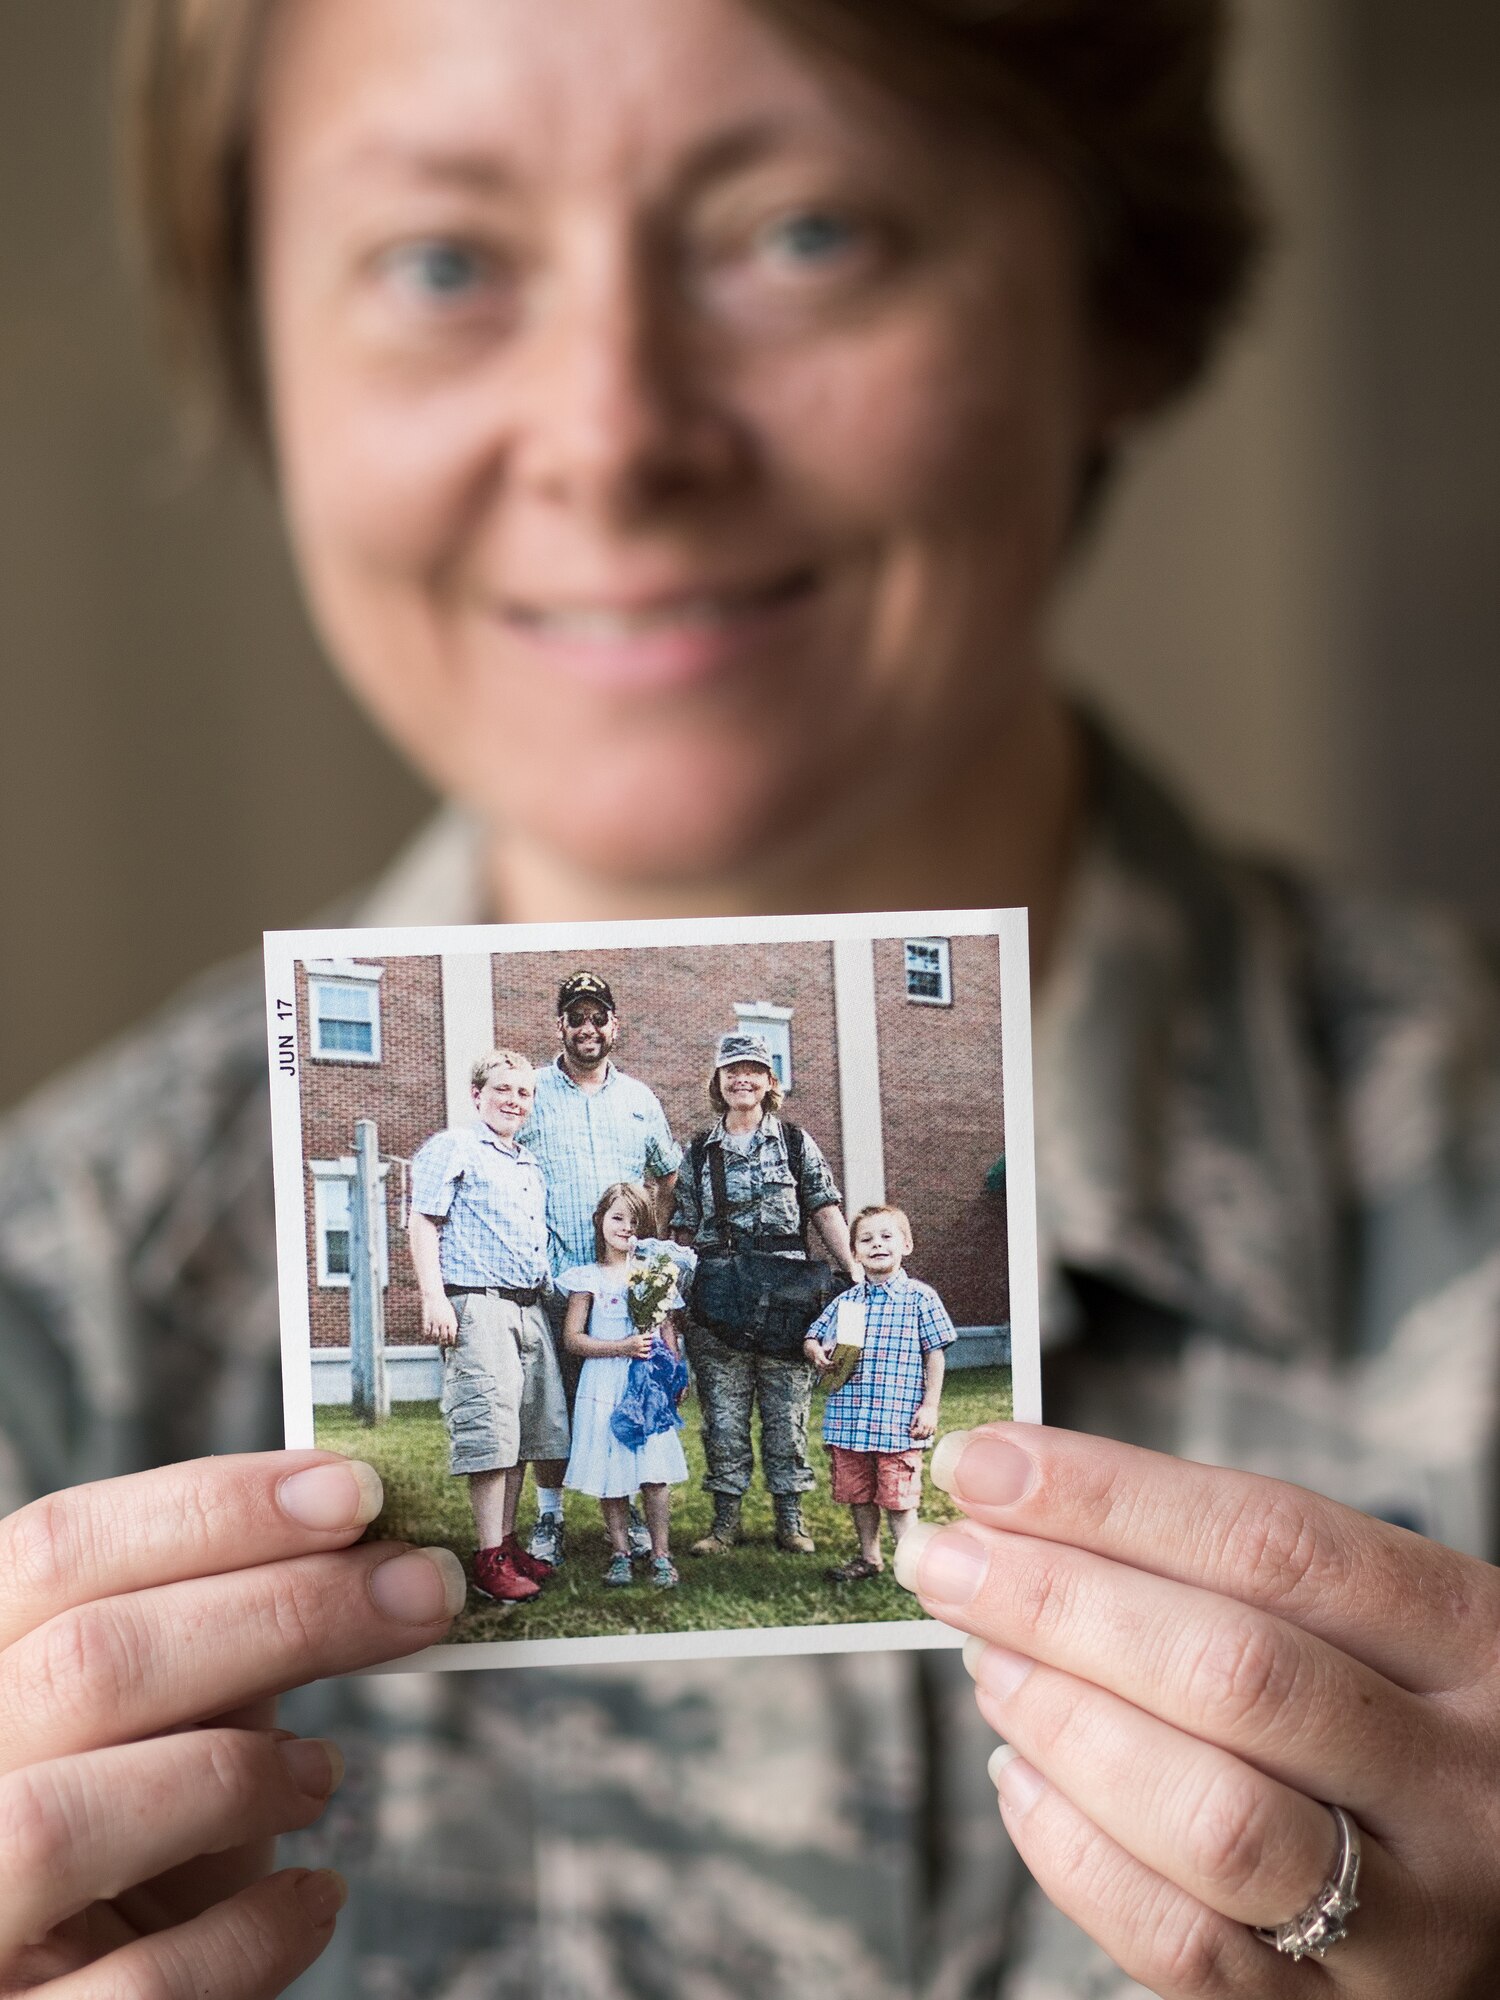 Airman 1st Class Crystal Jenkins, a photojournalist assigned to the 673d Air Base Wing Public Affairs unit, holds a photo of her and her family after she graduated from Defense Information School at Fort Meade, Md., in 2017. Jenkins was inspired to join the U.S. Air Force during the 2016 Arctic Thunder Open House at Joint Base Elmendorf-Richardson, Alaska. After enlisting in 2016 she was given the opportunity to return to the base she was recruited from.